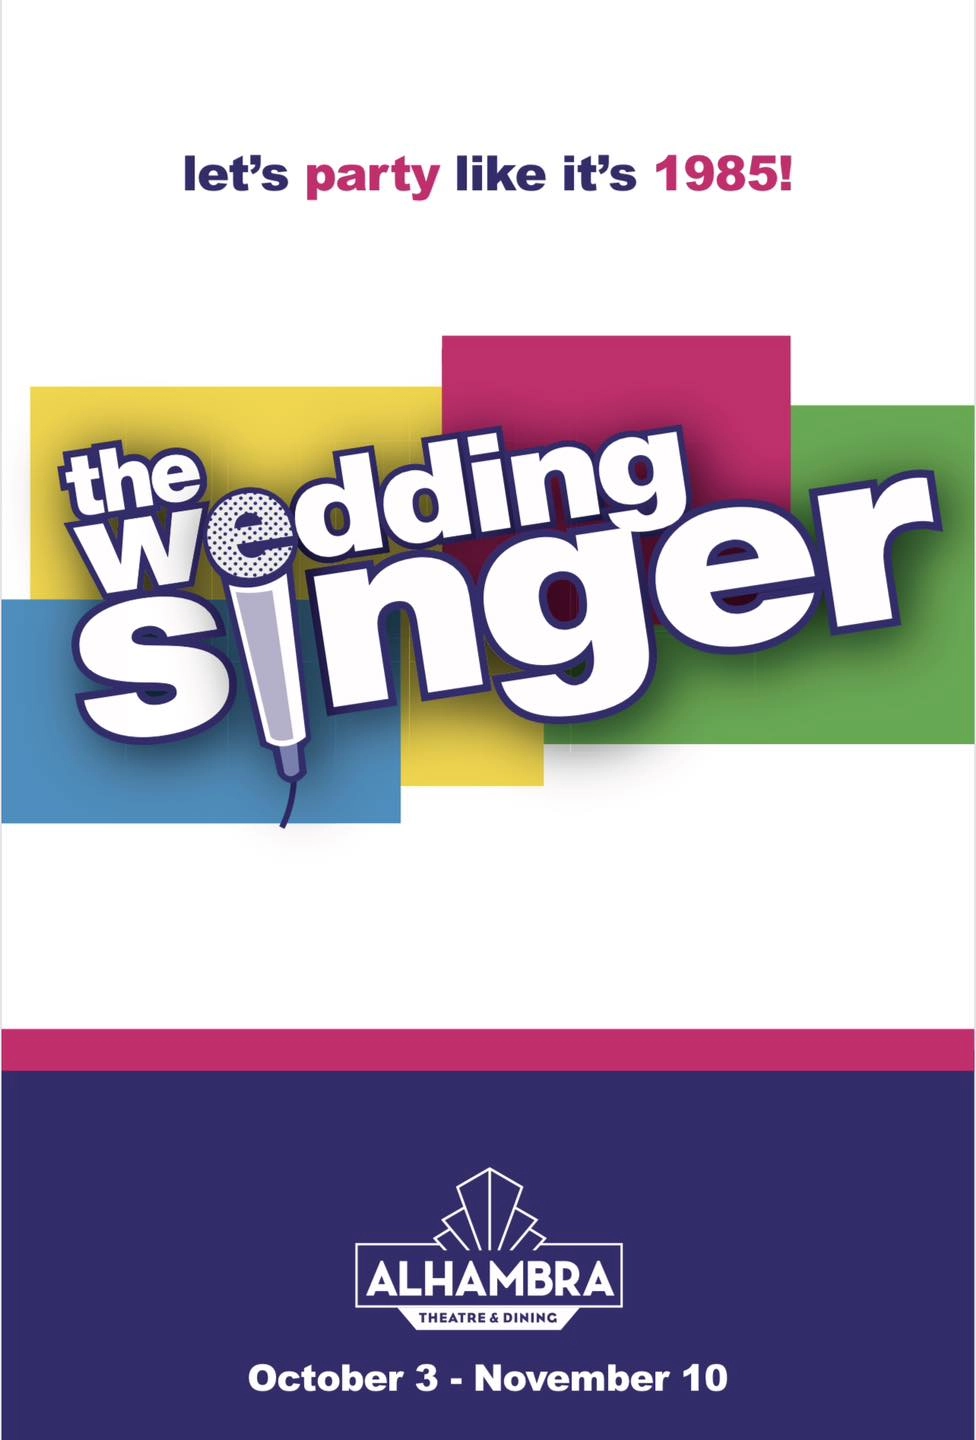 image from The Wedding Singer